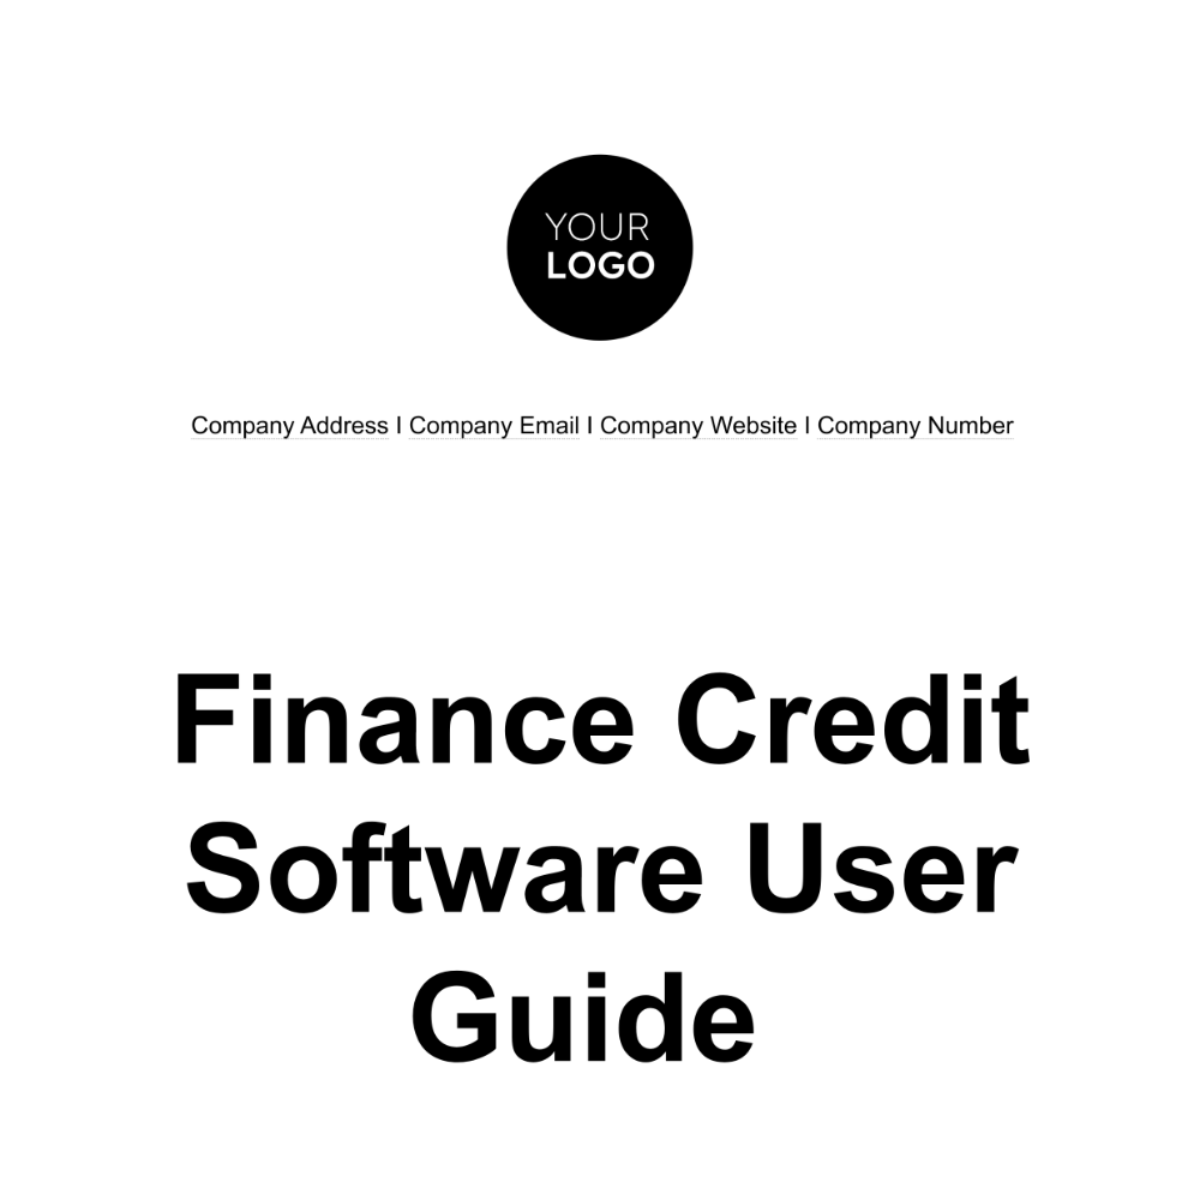 Finance Credit Software User Guide Template